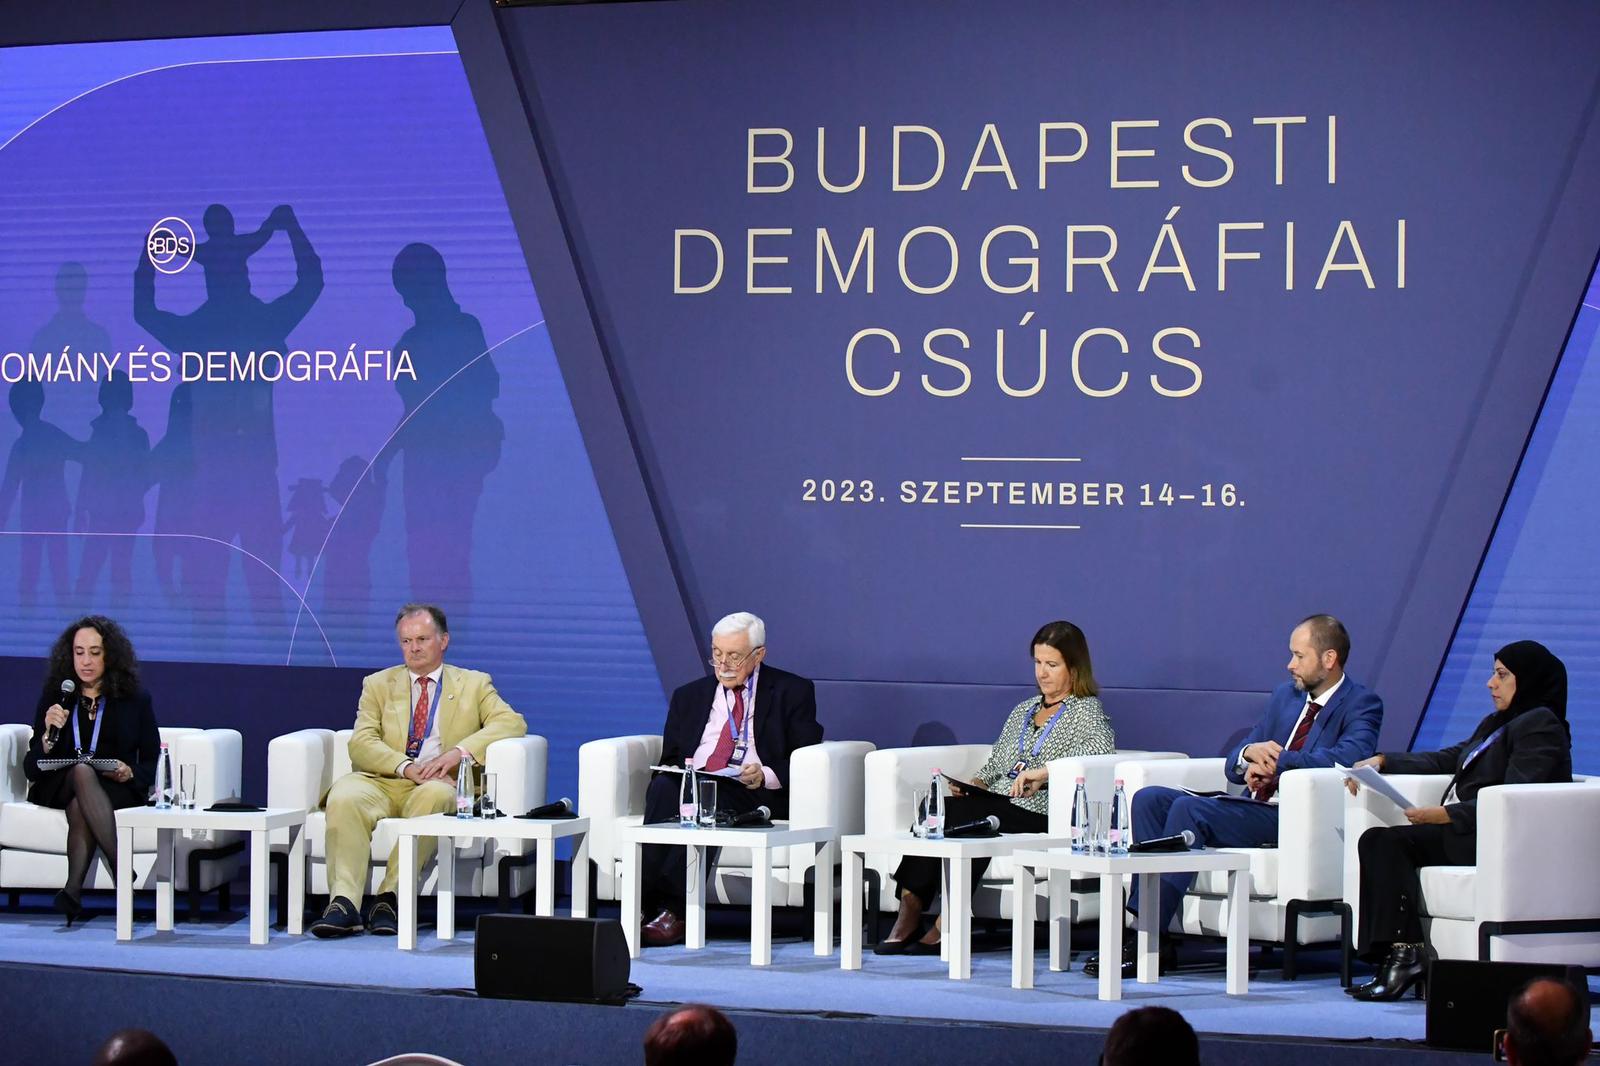 DIFI participated on in the 5th Budapest Demographic Summit in Hungary